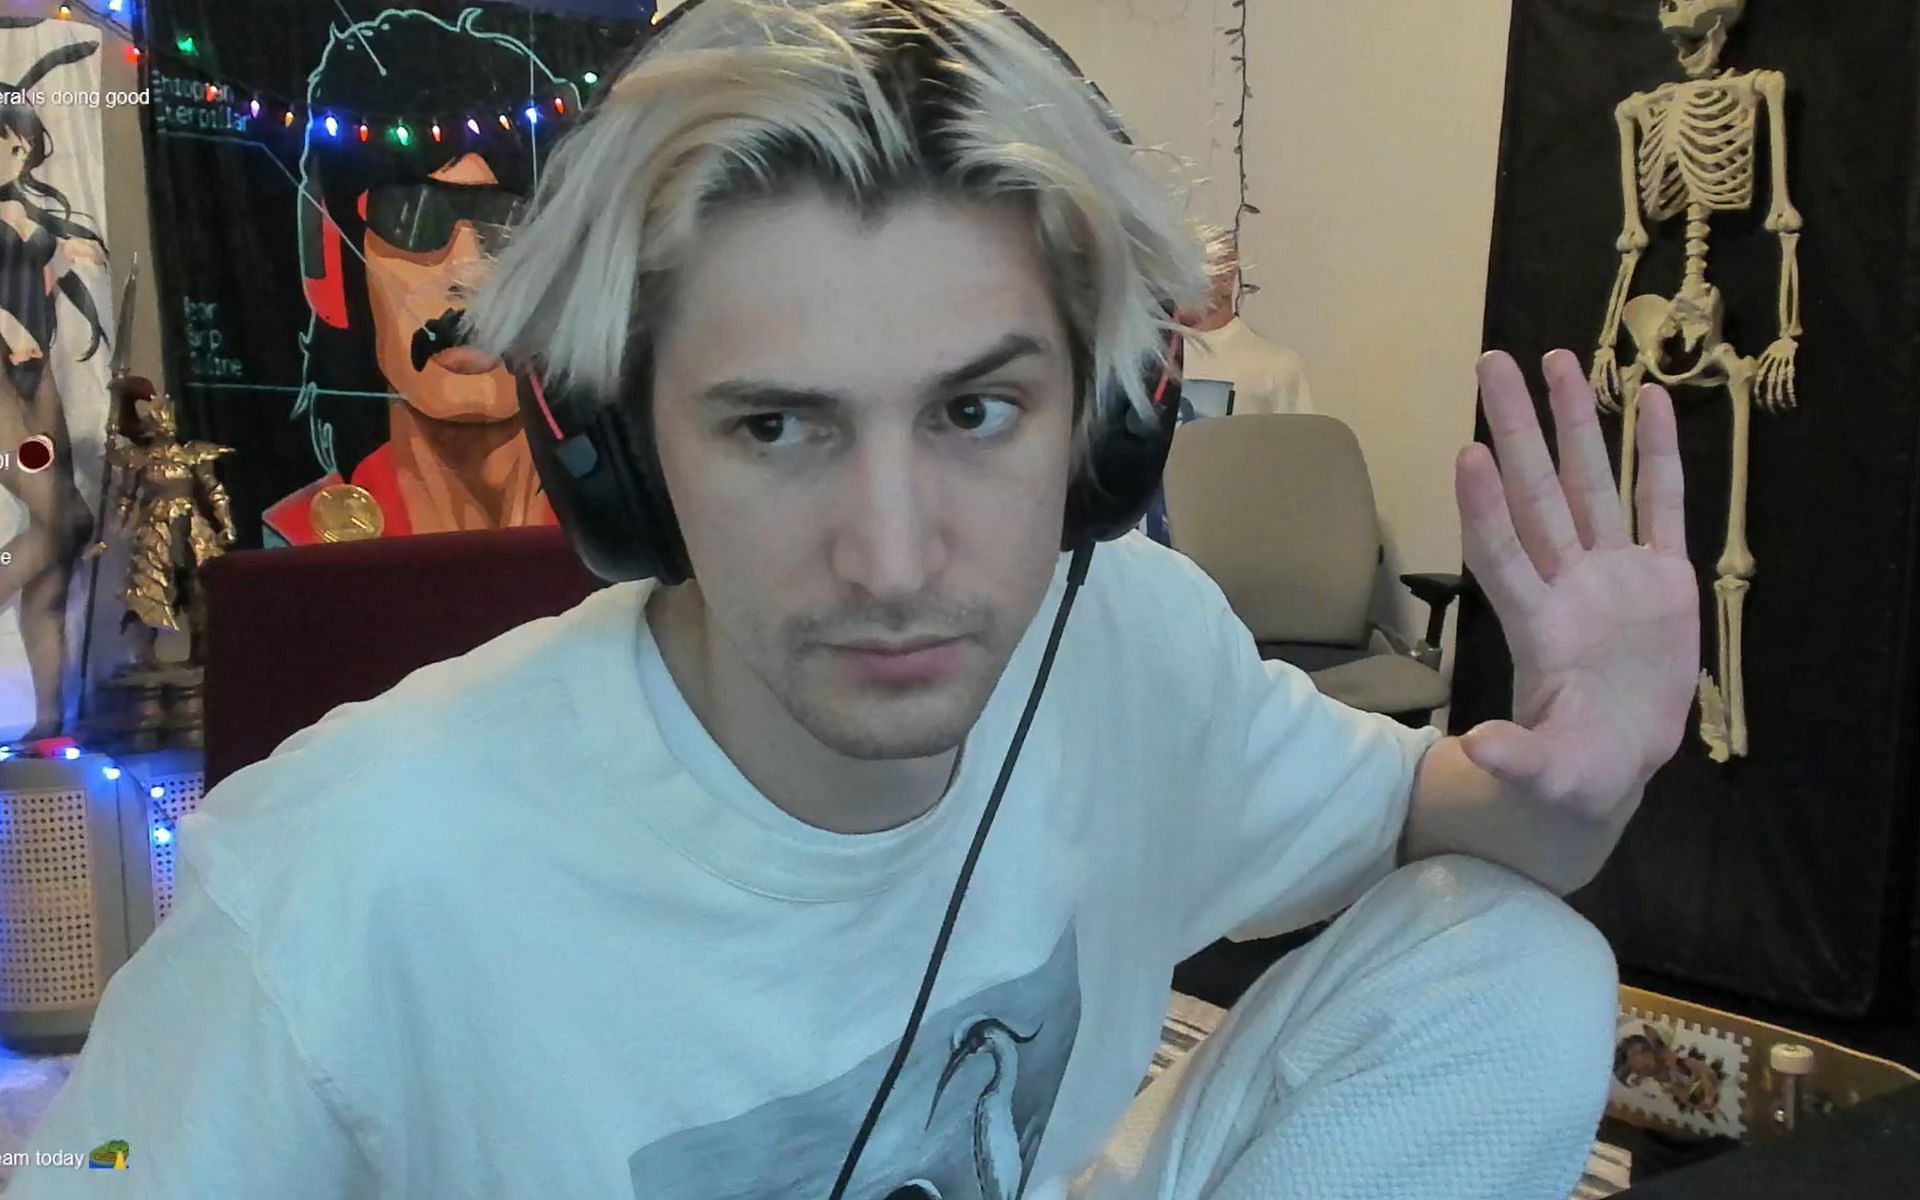 It's just wrong" - xQc gives his take on a 19-year-old dating a 17-year-old